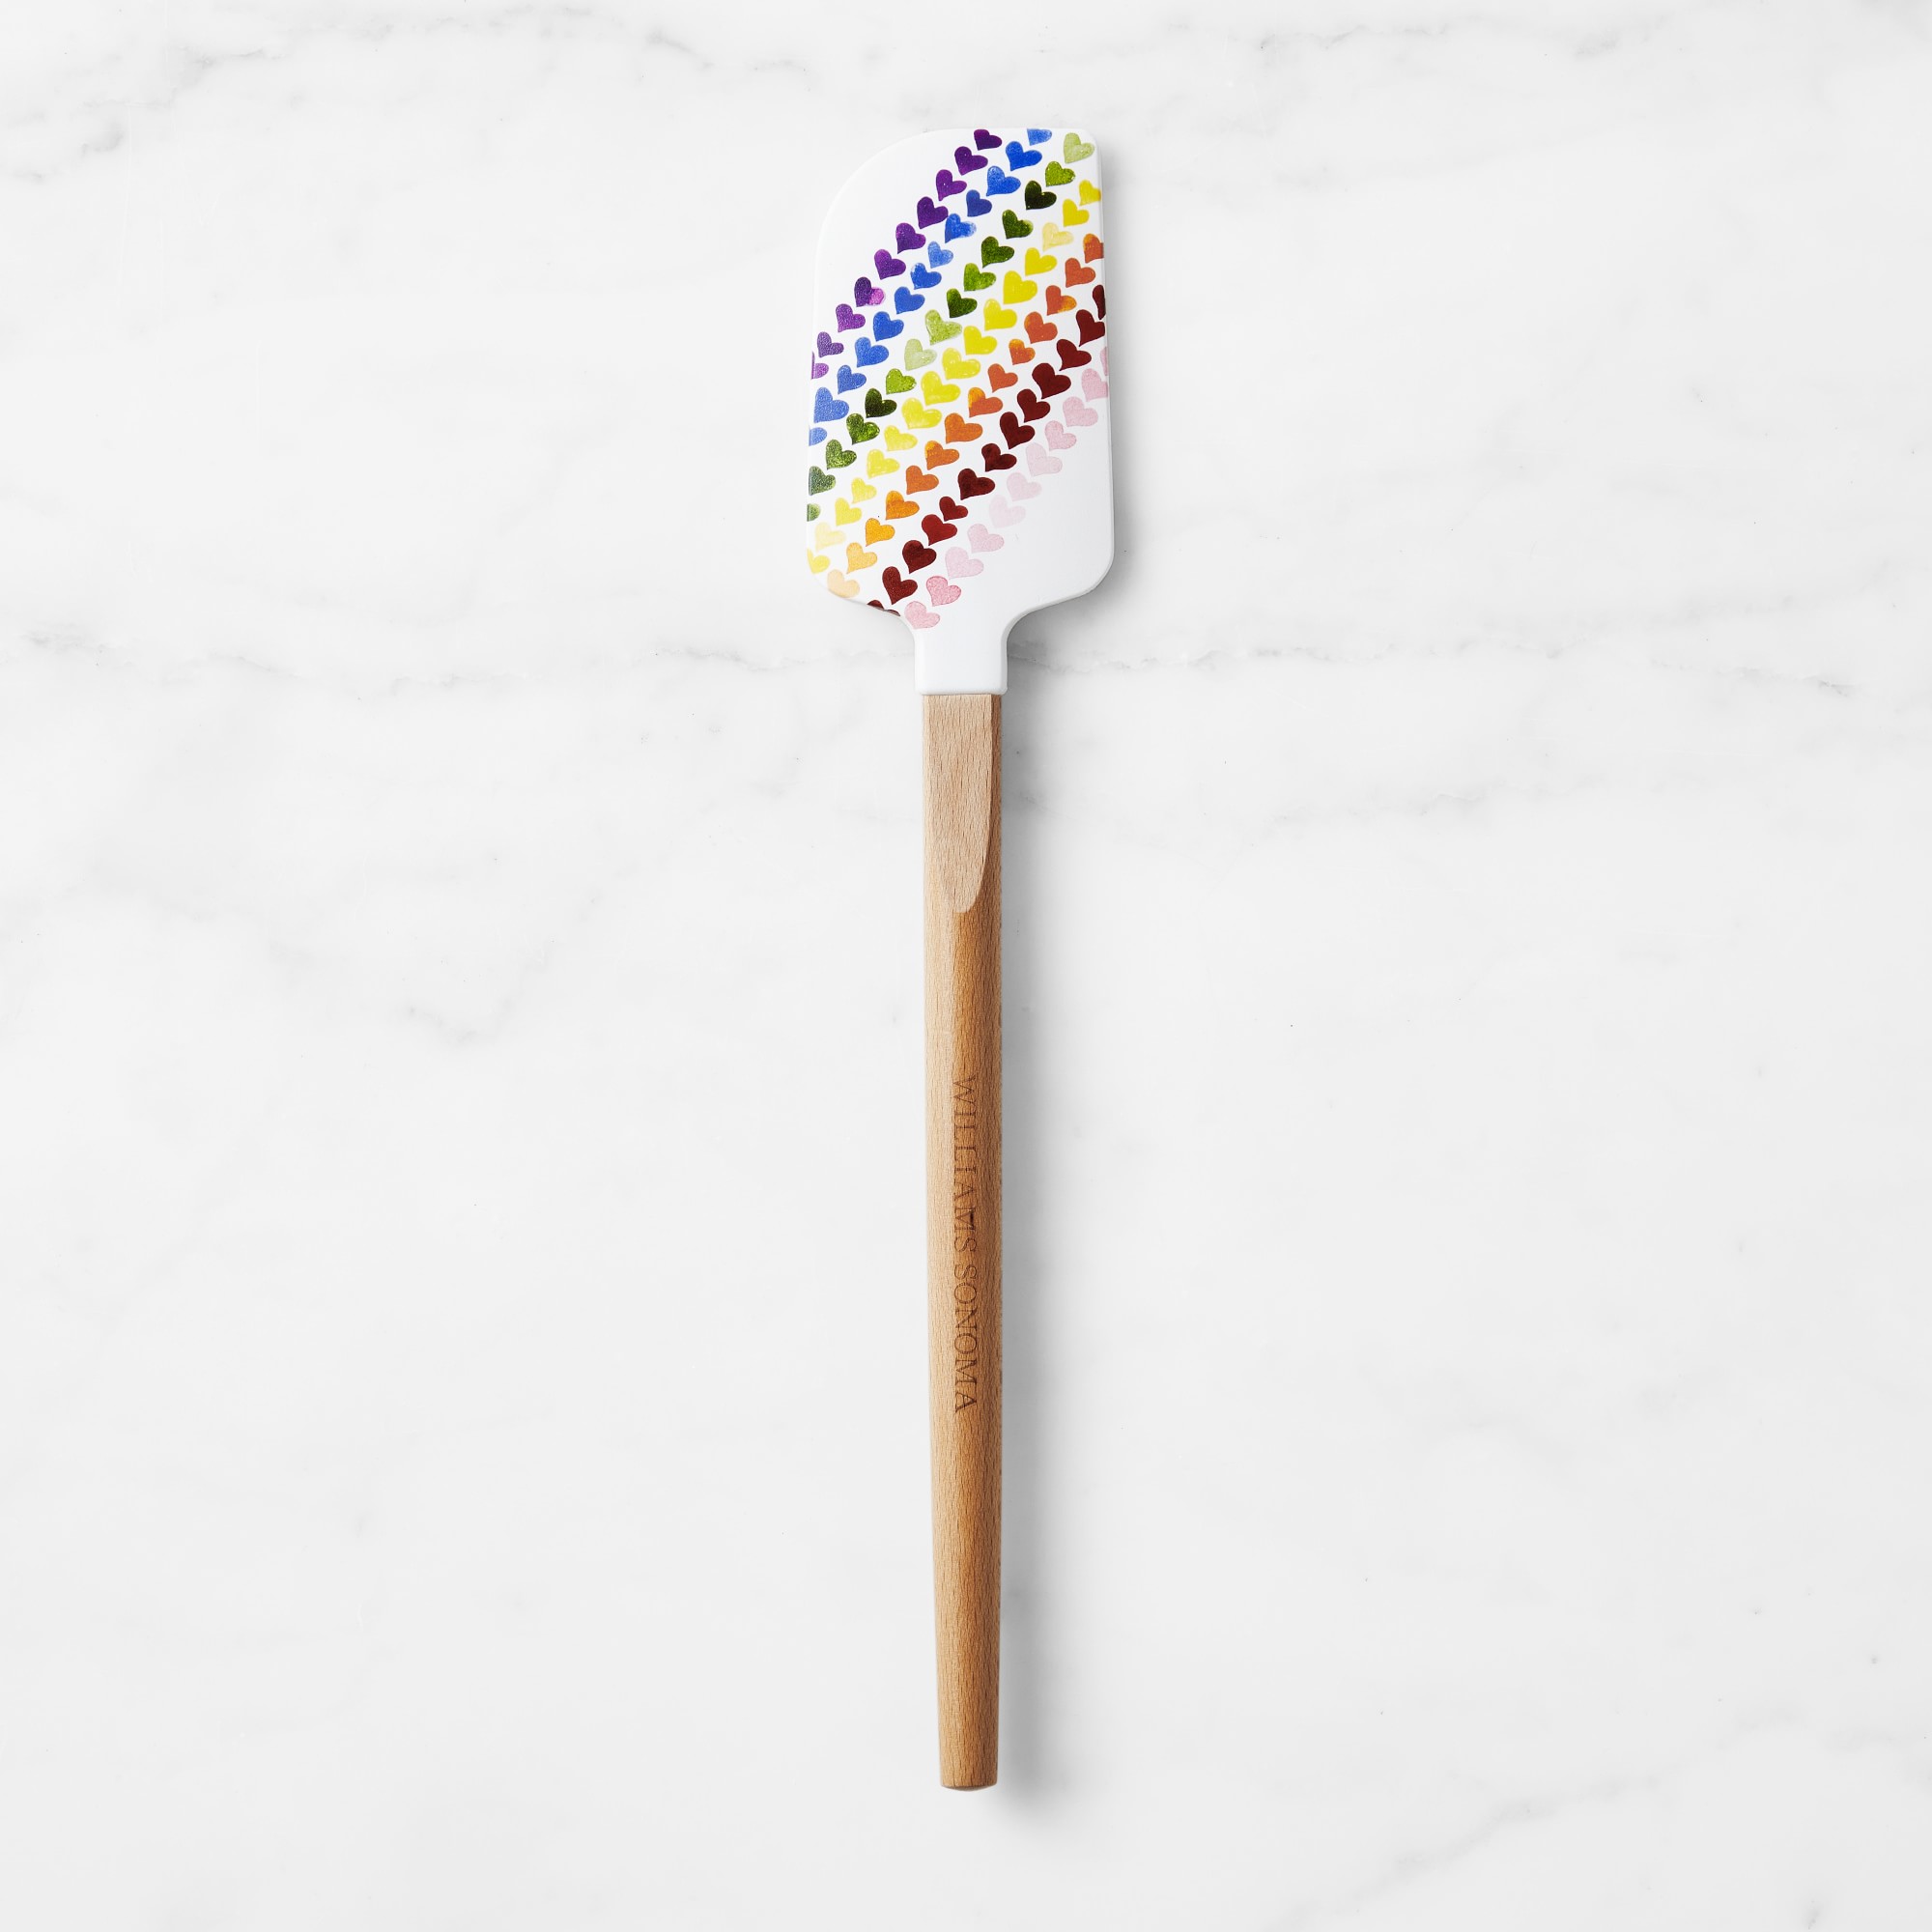 Pride products to celebrate the LGBTQ+ community - Good Morning America